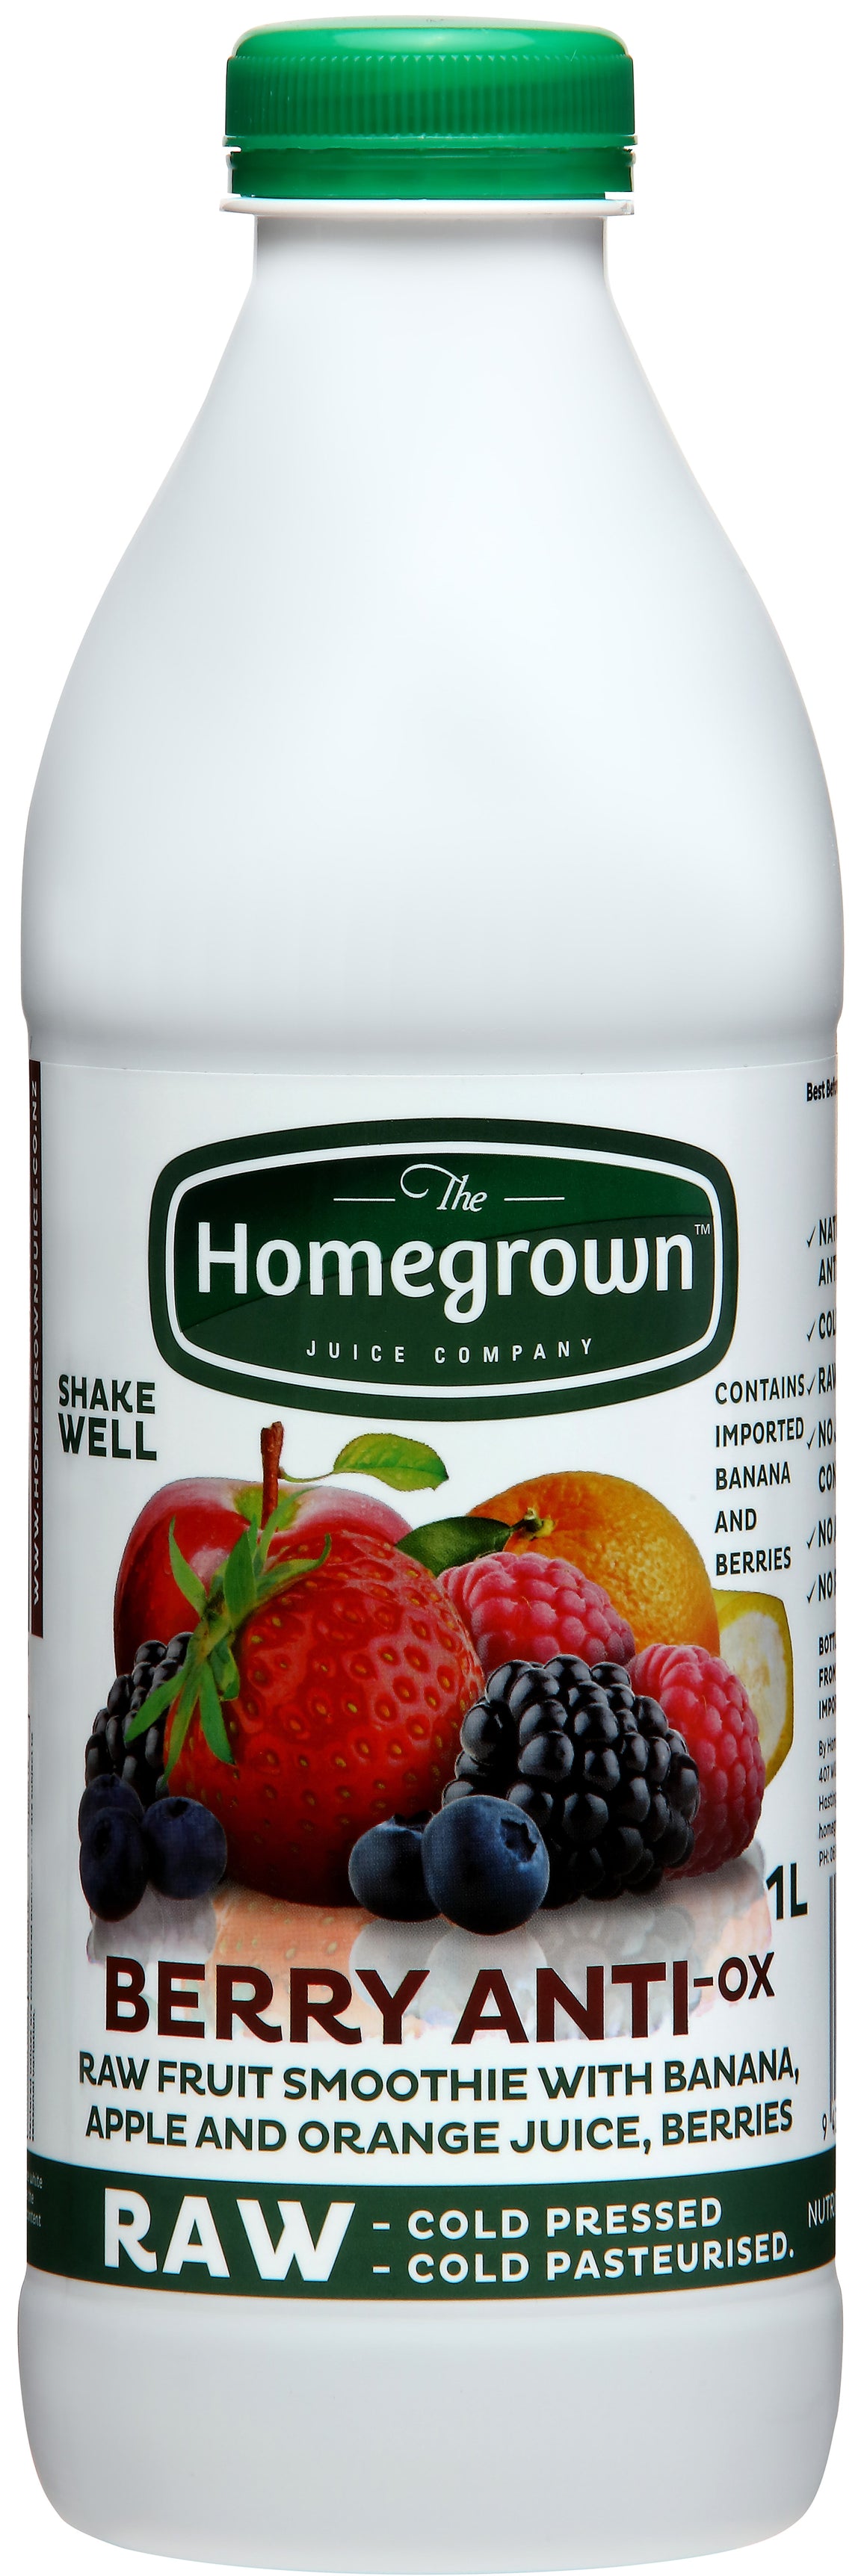 1L Homegrown RAW cold pressed Pure Berry Anti- Ox  Smoothie